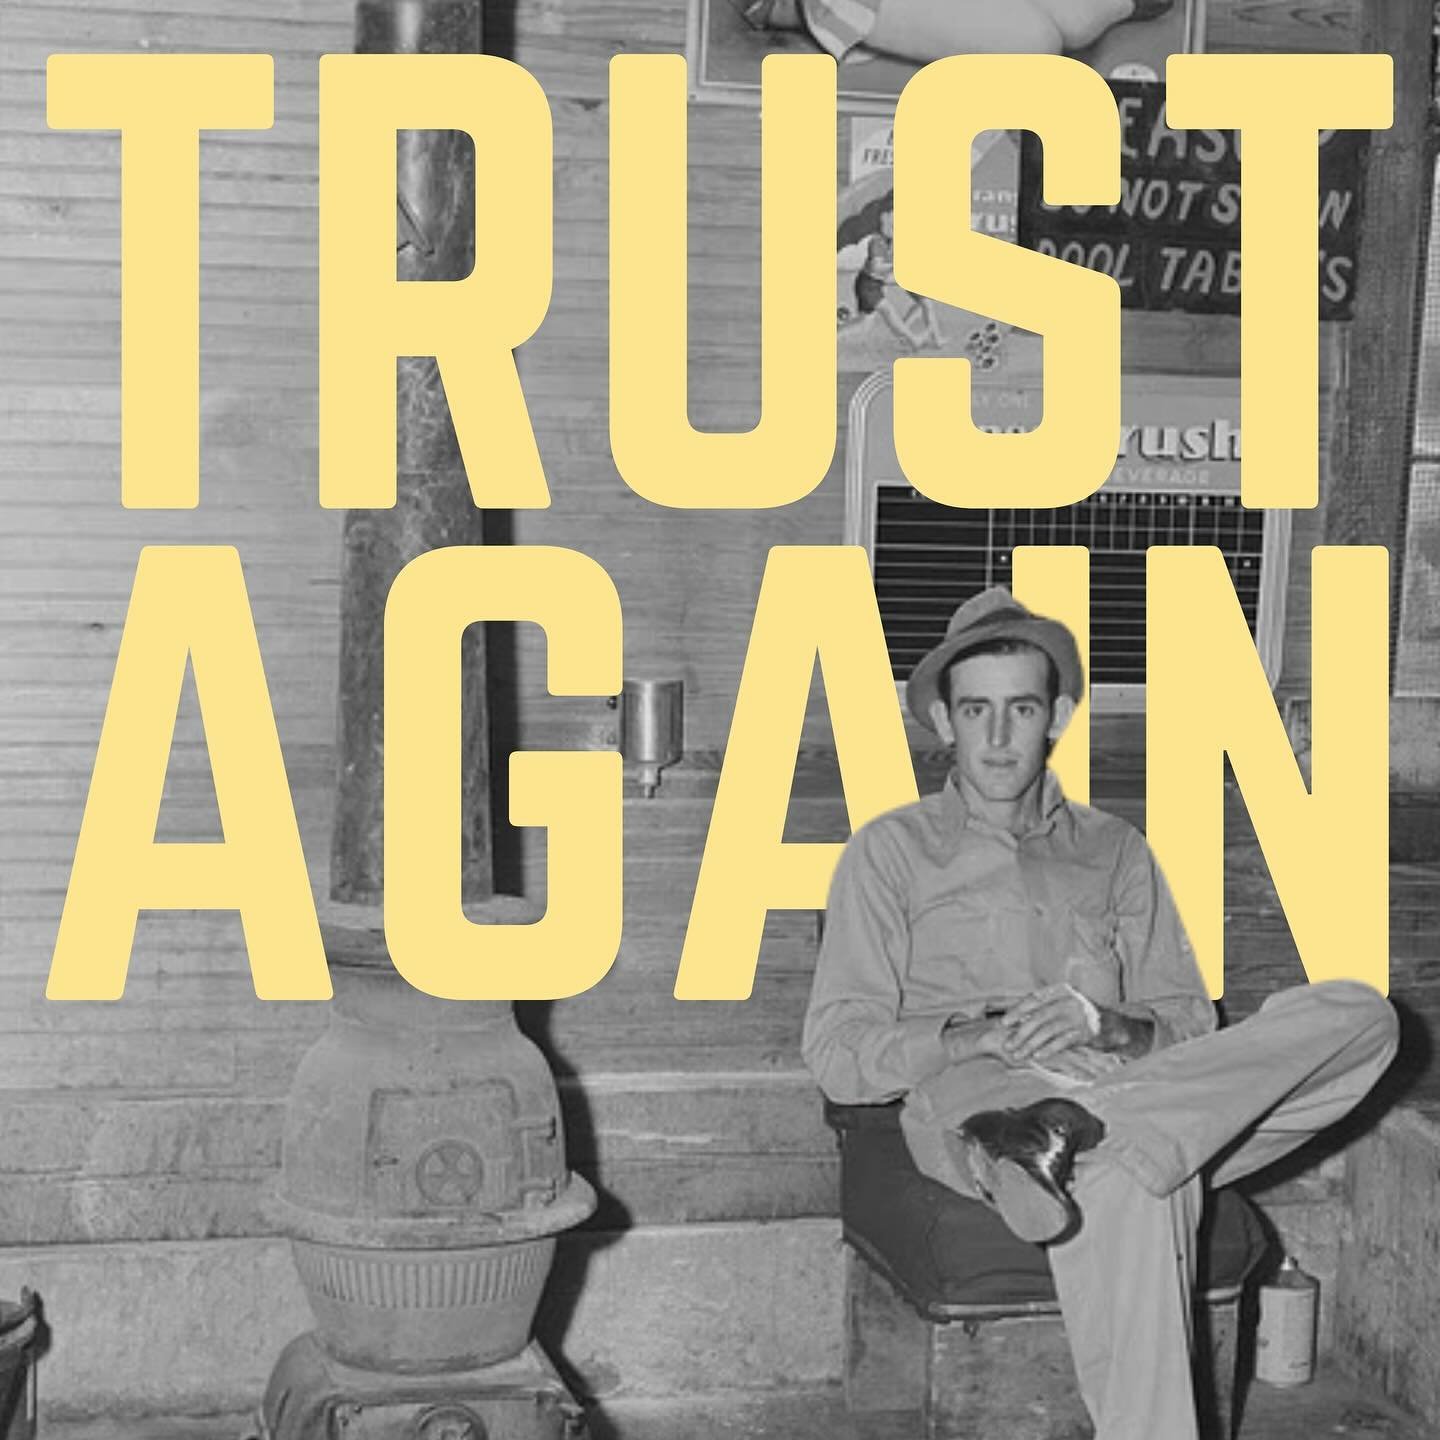 New song out today! It&rsquo;s called &ldquo;Trust Again.&rdquo; Links to listen in my bio.

So much love went into this song. Special shout out to the string players for making my string arrangement come to life, and to the amazing Kayla Molocznik f